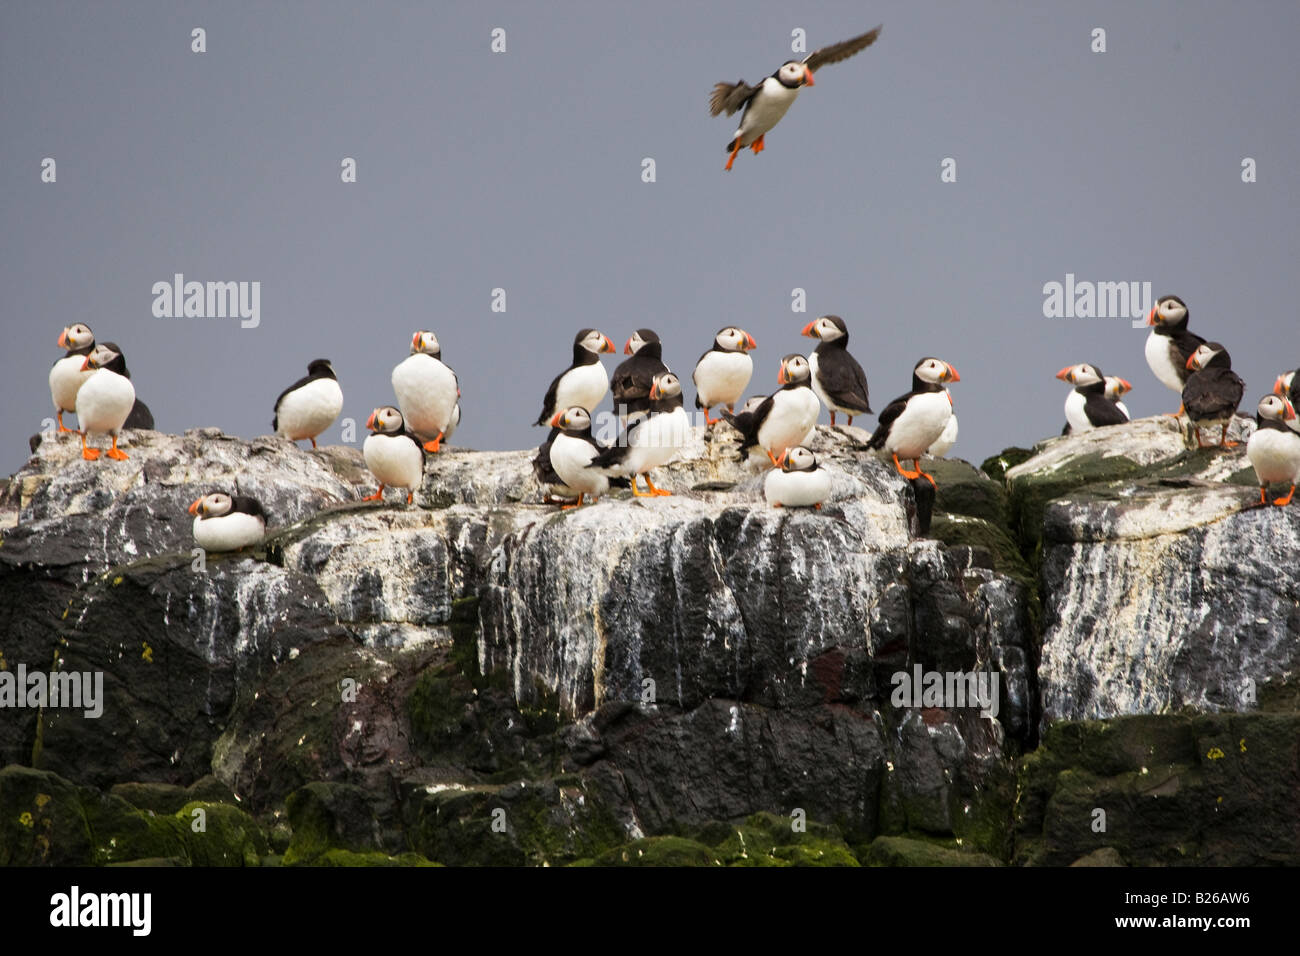 Group of Puffins sitting on rocks Stock Photo